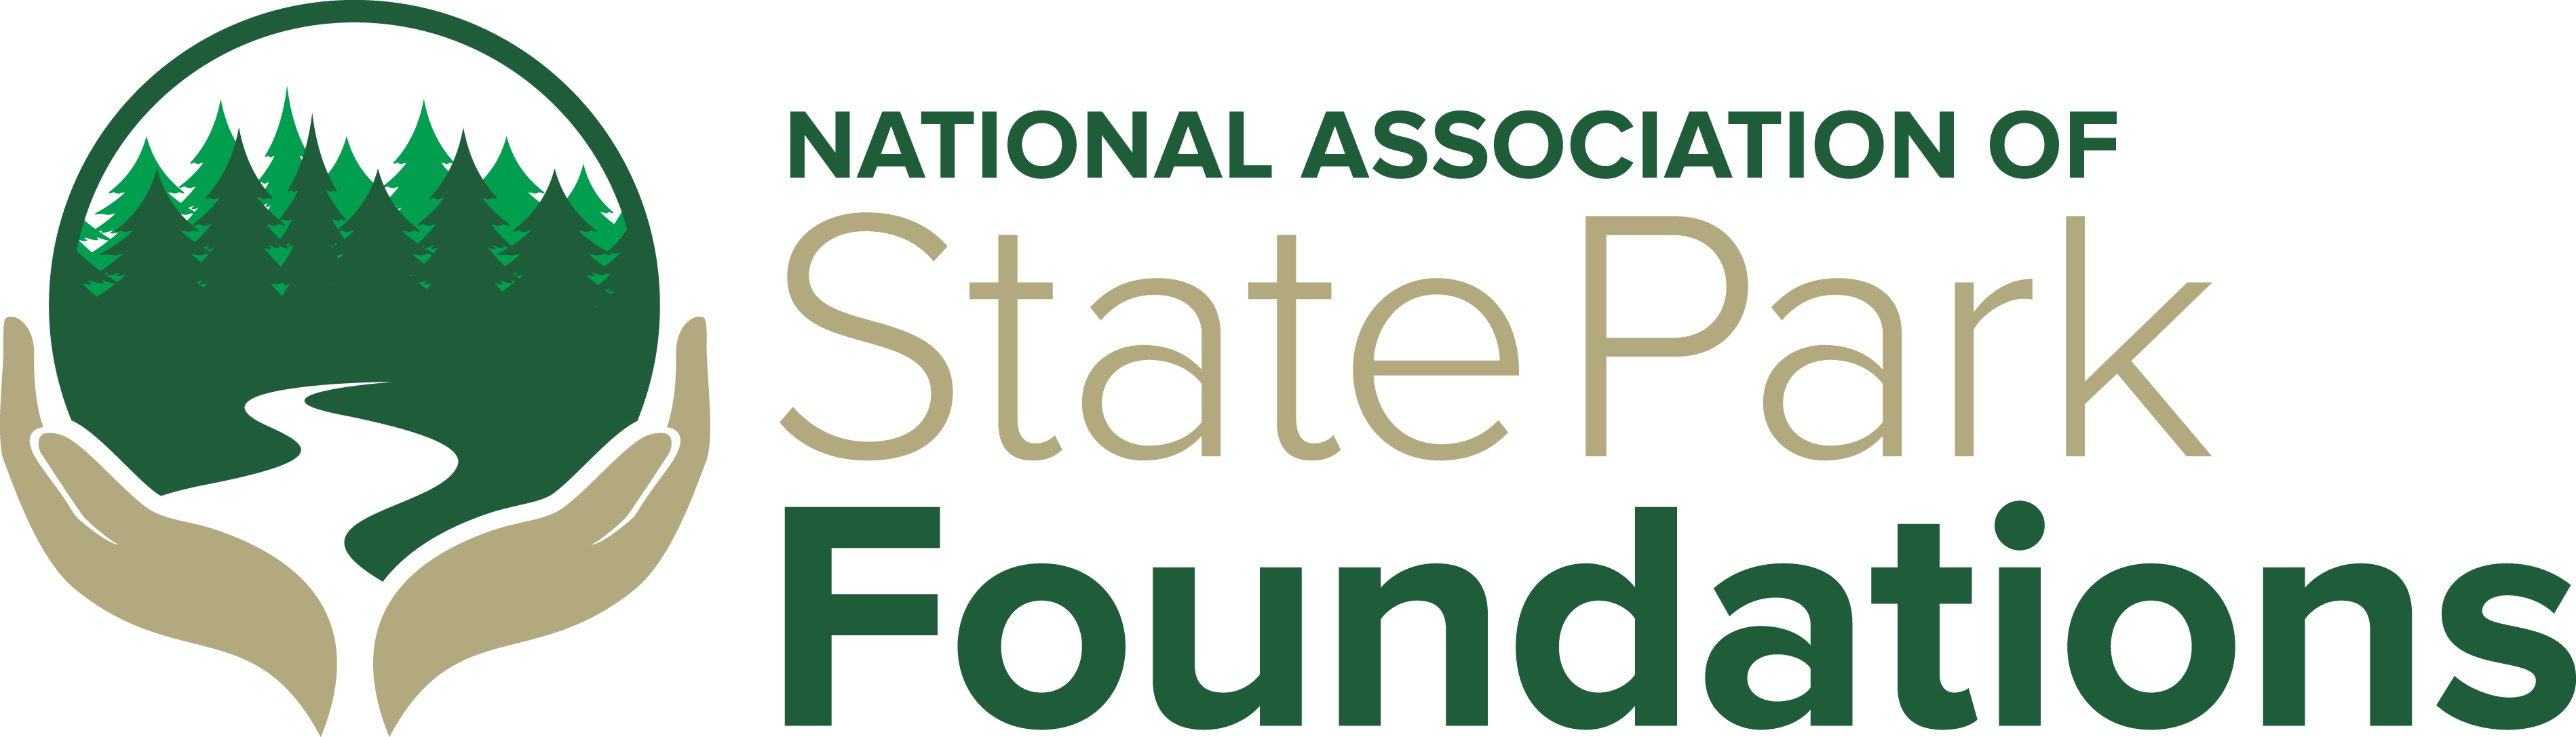 National Association of State Park Foundations